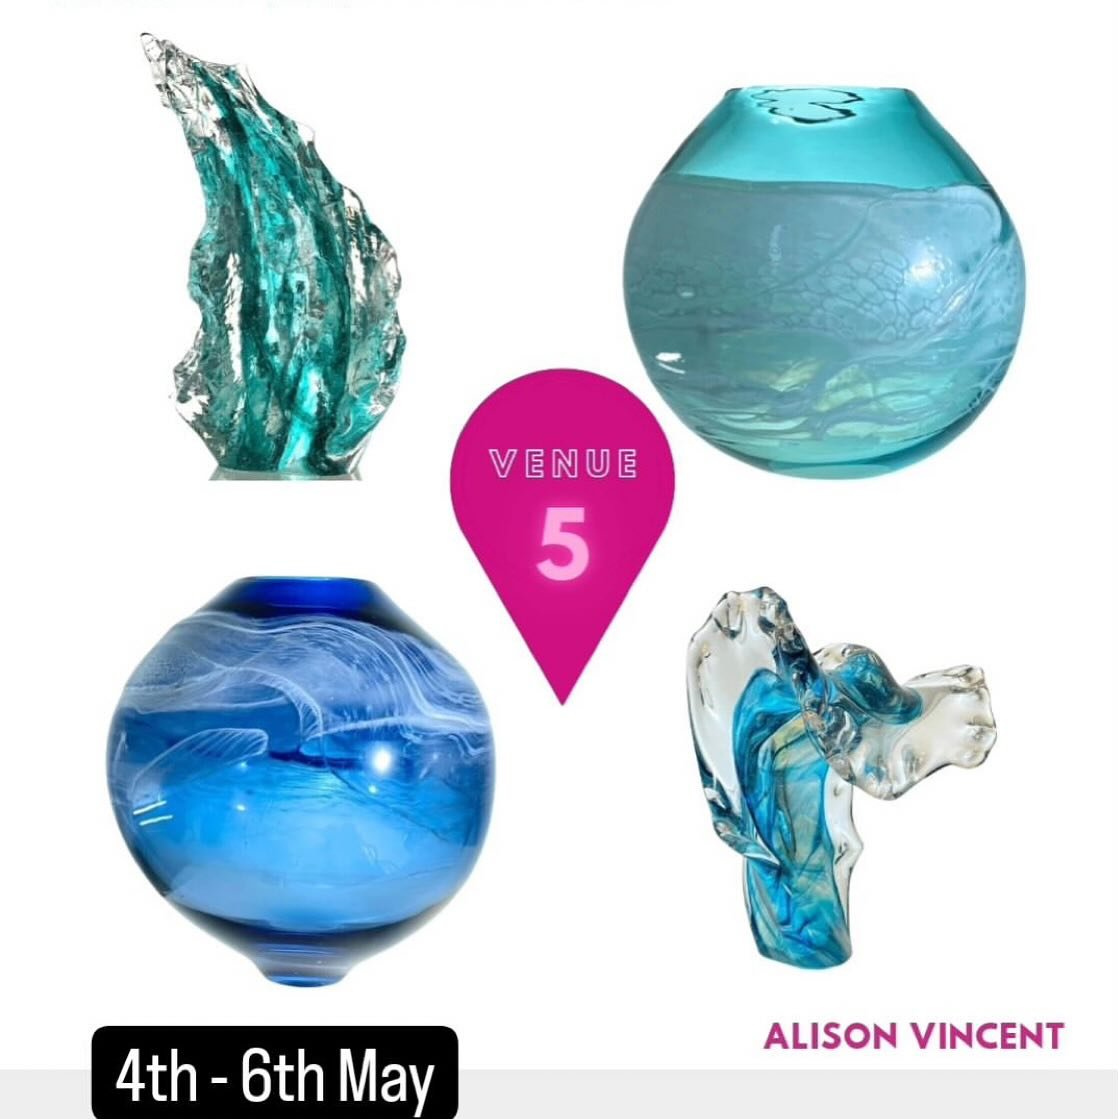 Countdown to this weekend!!
Henley Arts Trail is going to be amazing this coming early May bank holiday weekend 4-6 May! @Henleyartstrail 

My Glass Art Inspired by Wilderness will be at Venue 5 River &amp; Rowing Museum, Henley, on the bank of the T